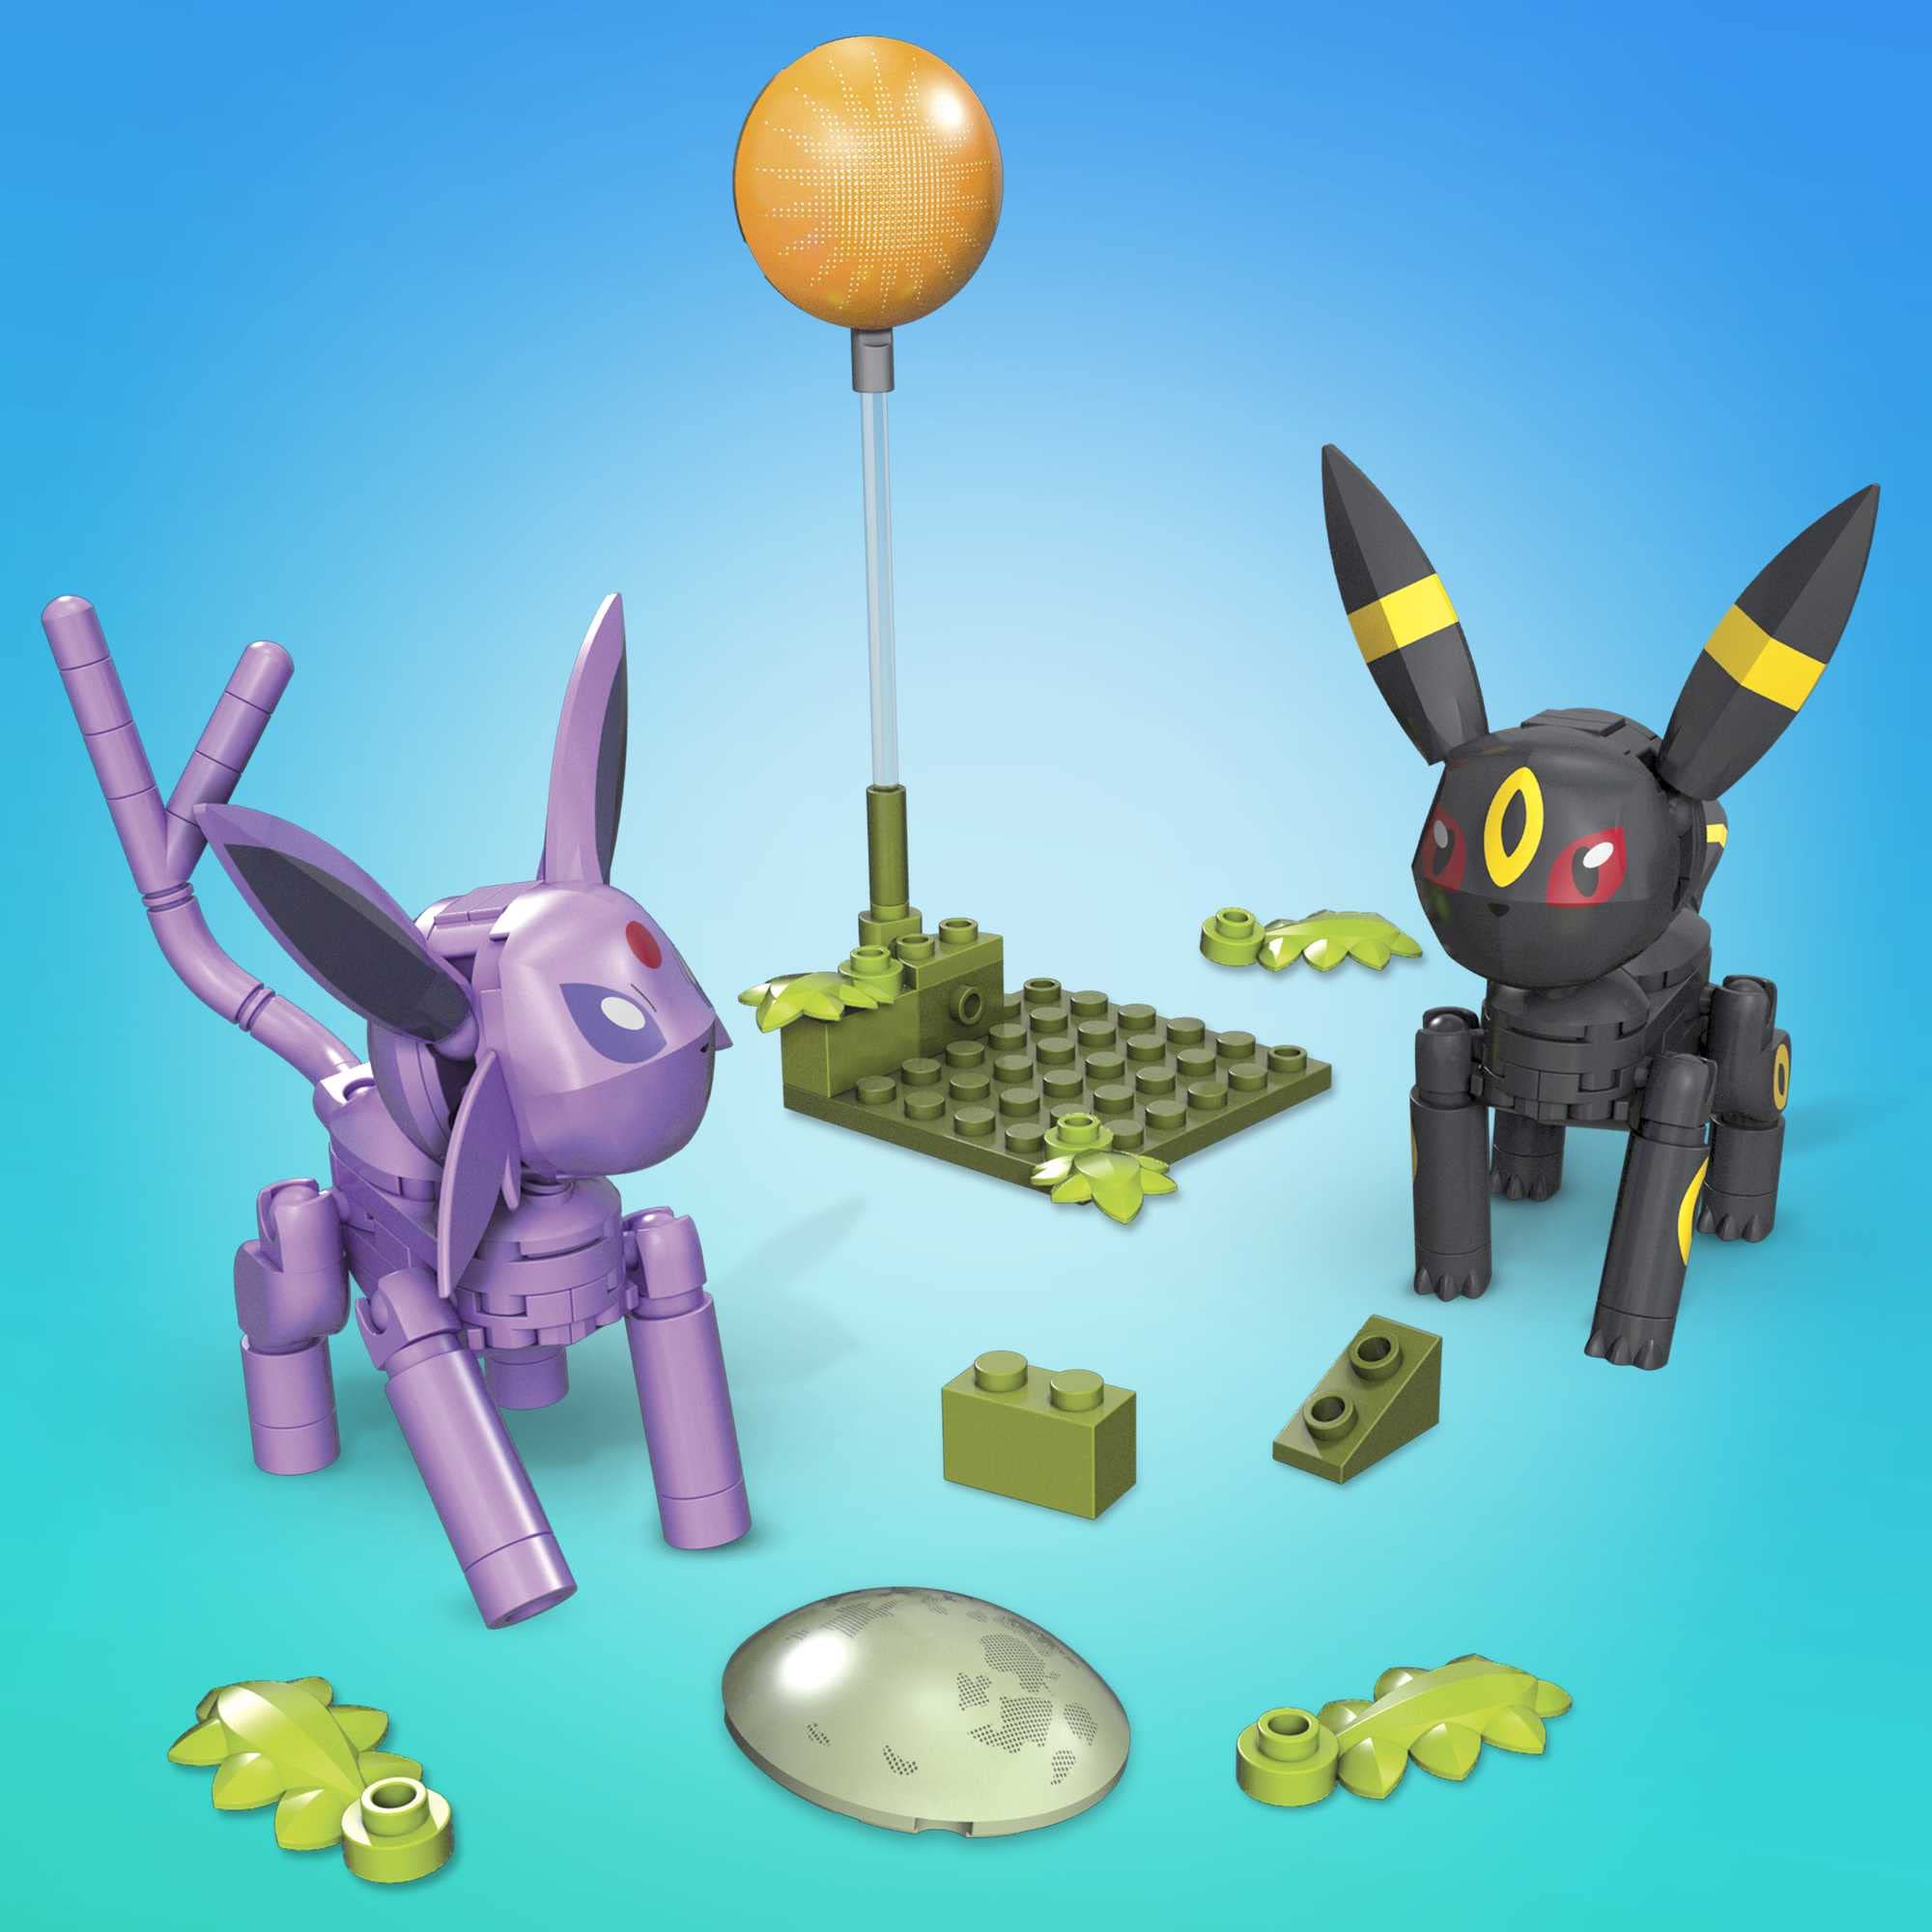 MEGA Pokémon Action Figure Building Toys, Umbreon & Espeon With 122 Pieces, 2 Poseable Characters, 4 Inches Tall, Gift Idea For Kids